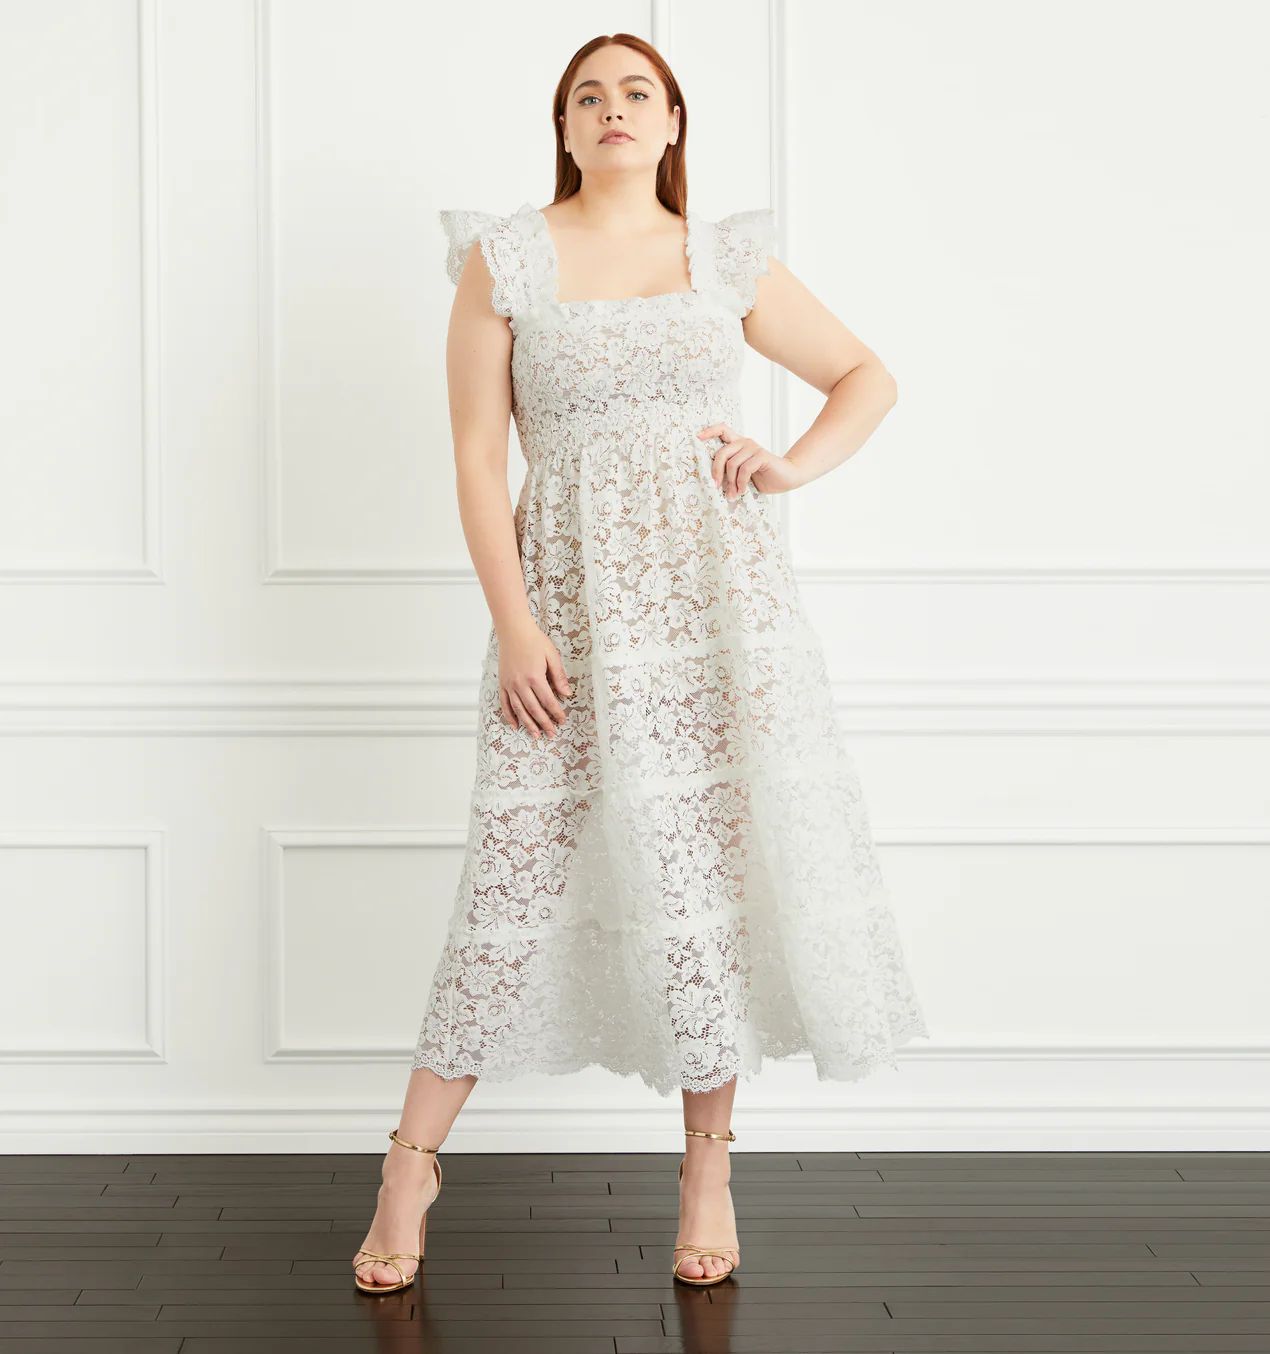 The Lace Ellie Nap Dress - White Lace | Hill House Home